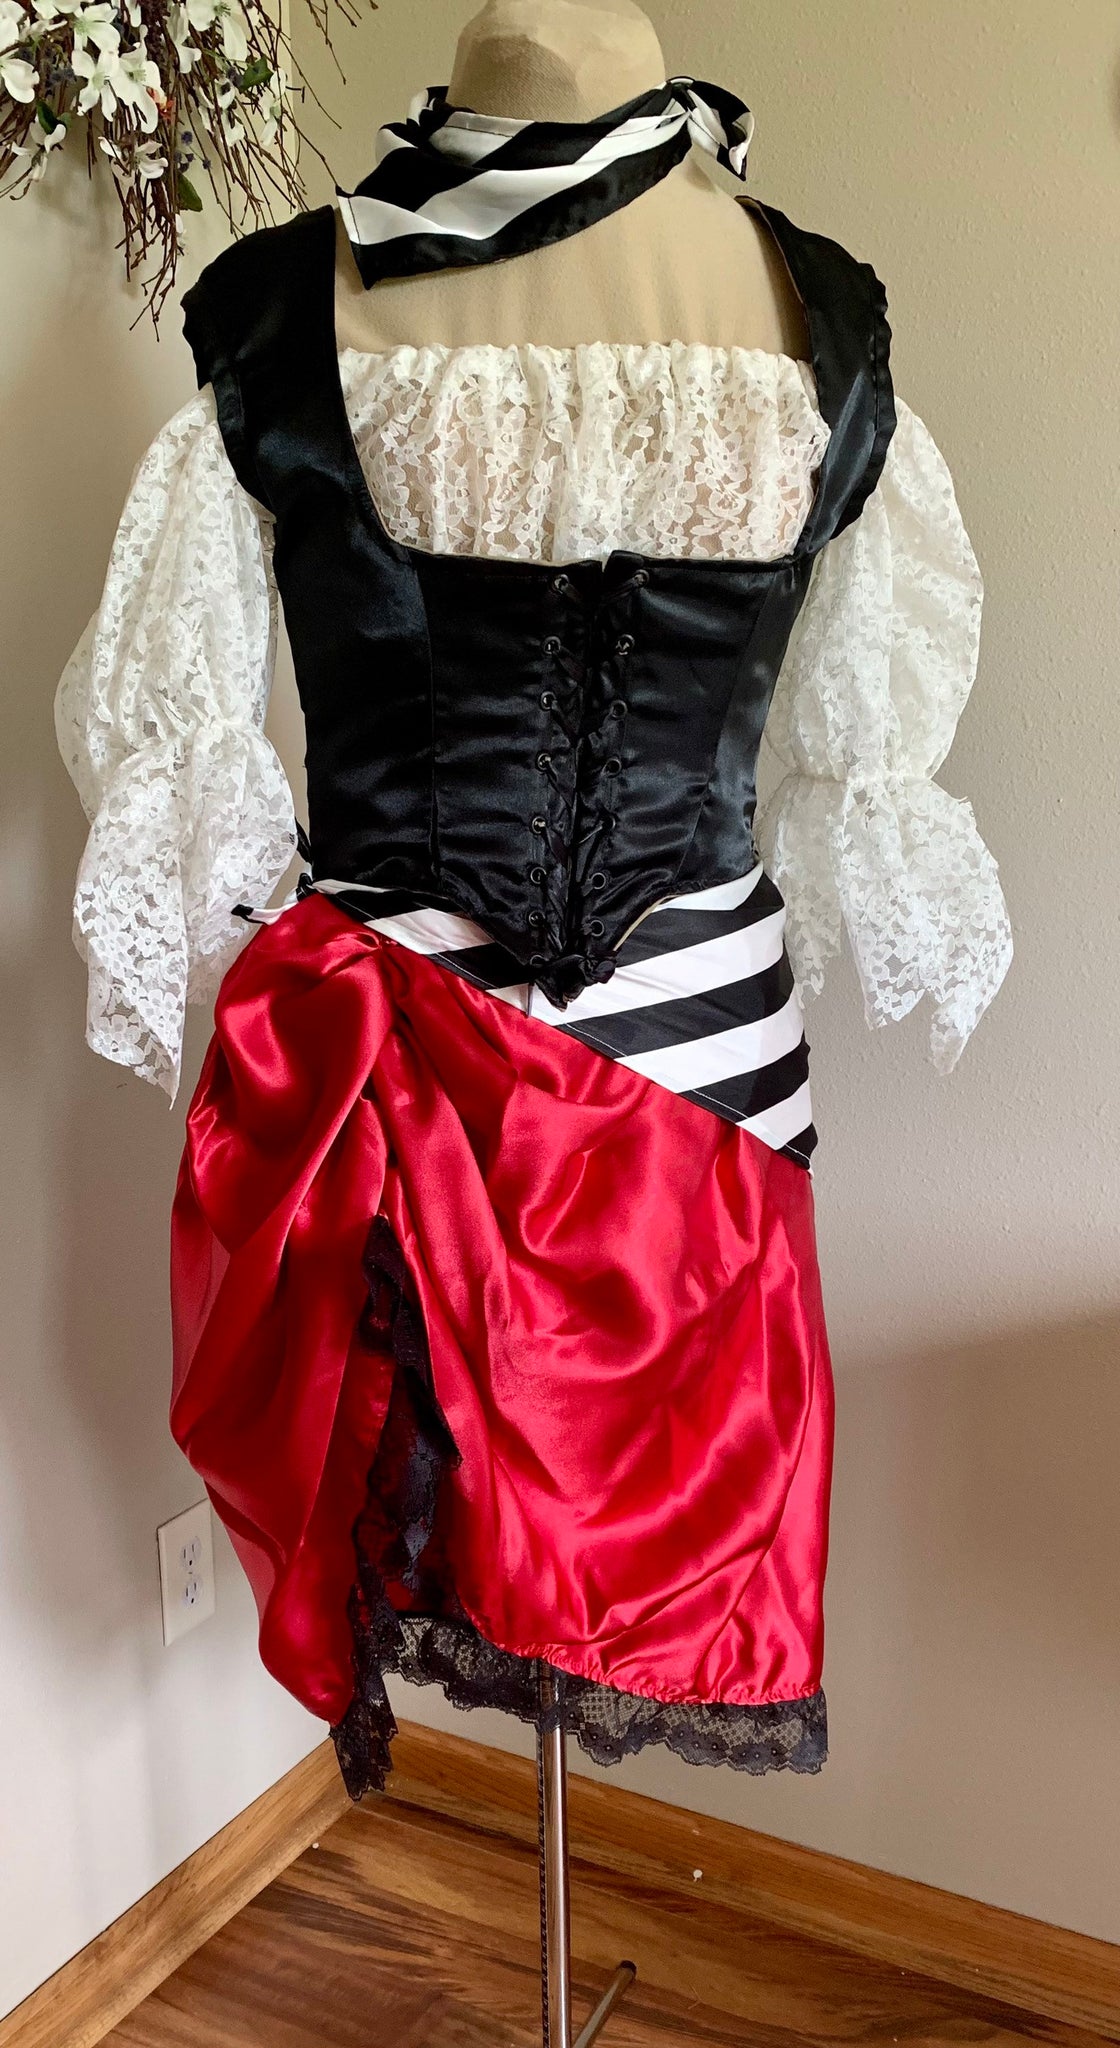 1700s 18th Century gown princess dress costume Rococo Pirate gothic red black steampunk corset